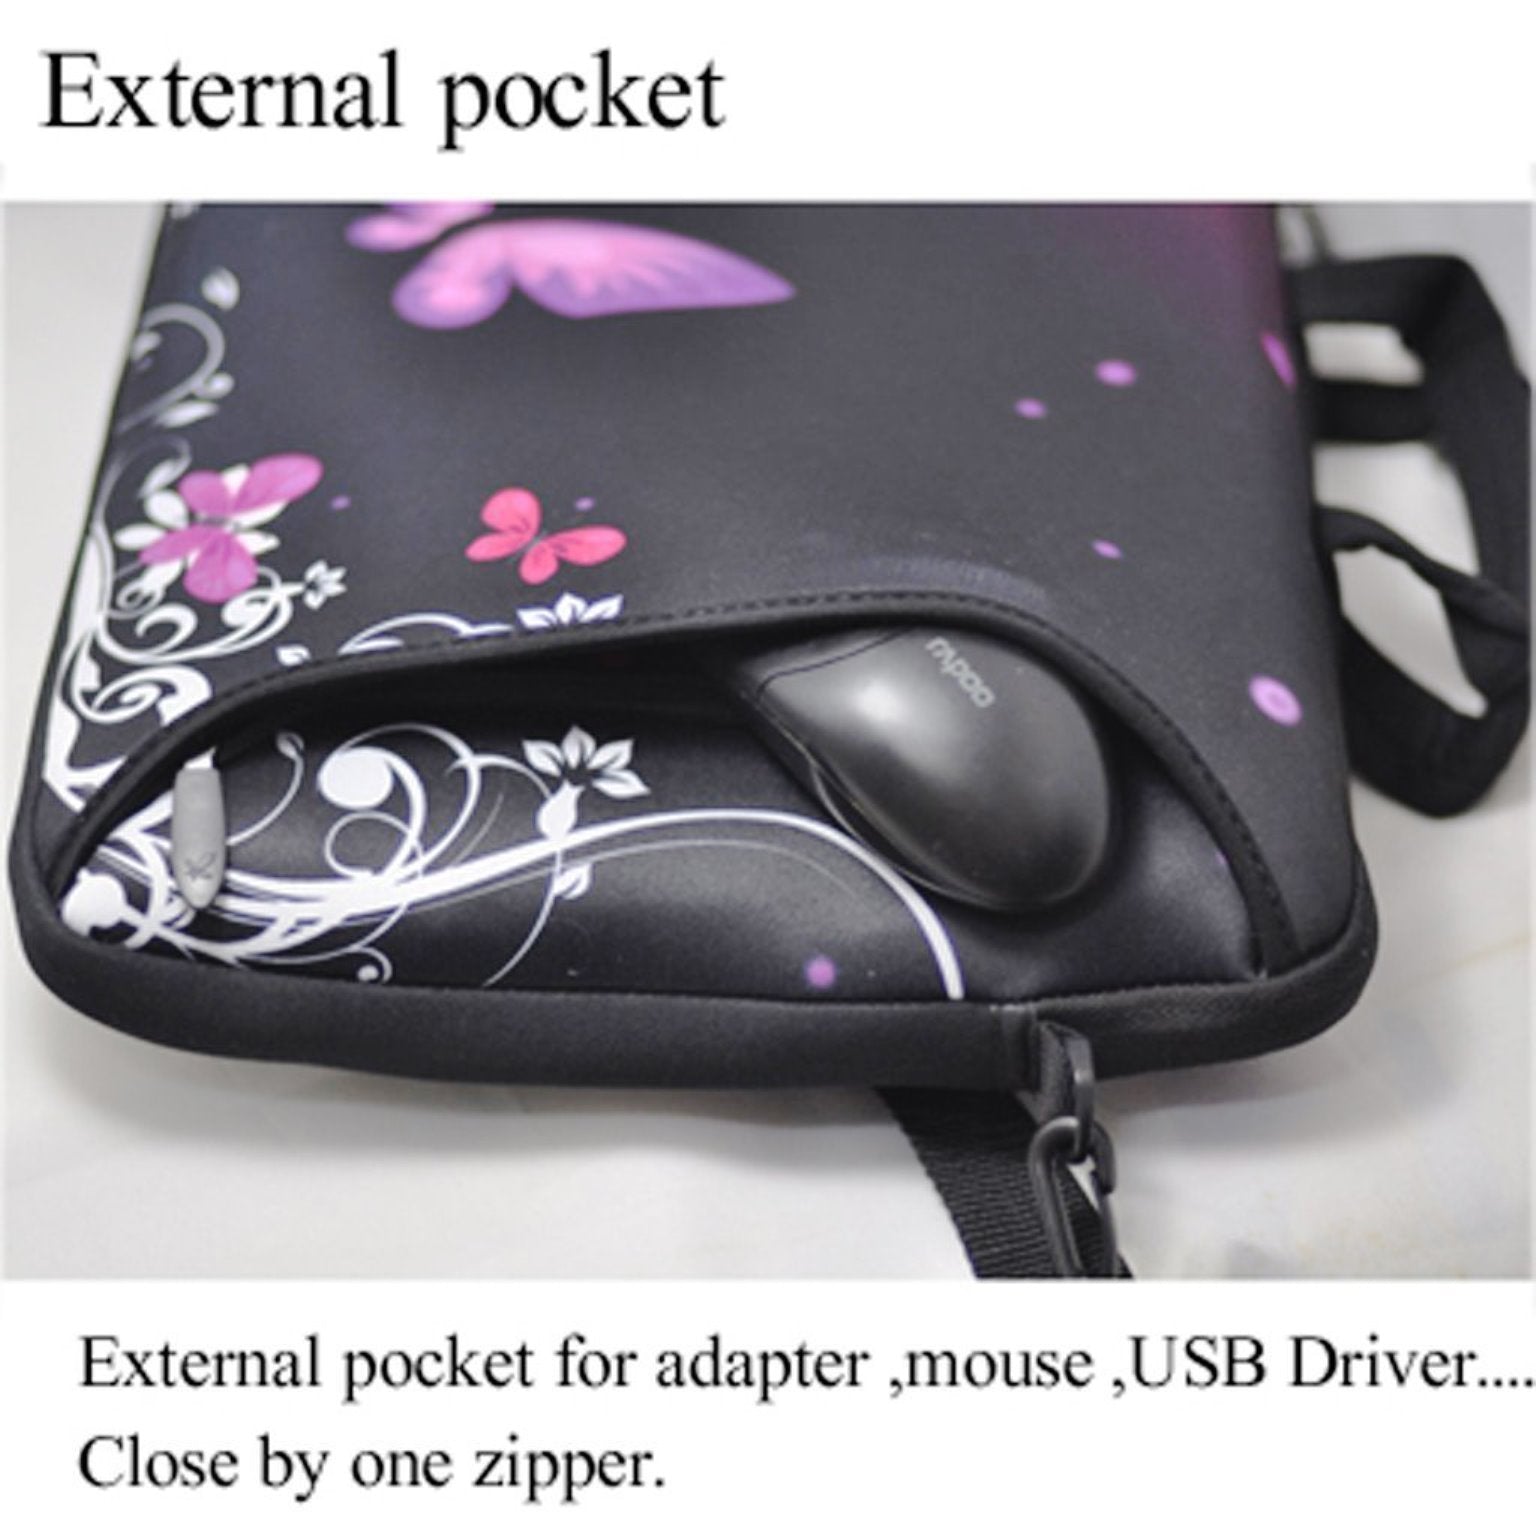 15"- 15.6" (inch) LAPTOP BAG CARRY CASE/BAG WITH HANDLE & STRAP NEOPRENE FOR LAPTOPS/NOTEBOOKS, *PURPLE BUTTERFLIES*